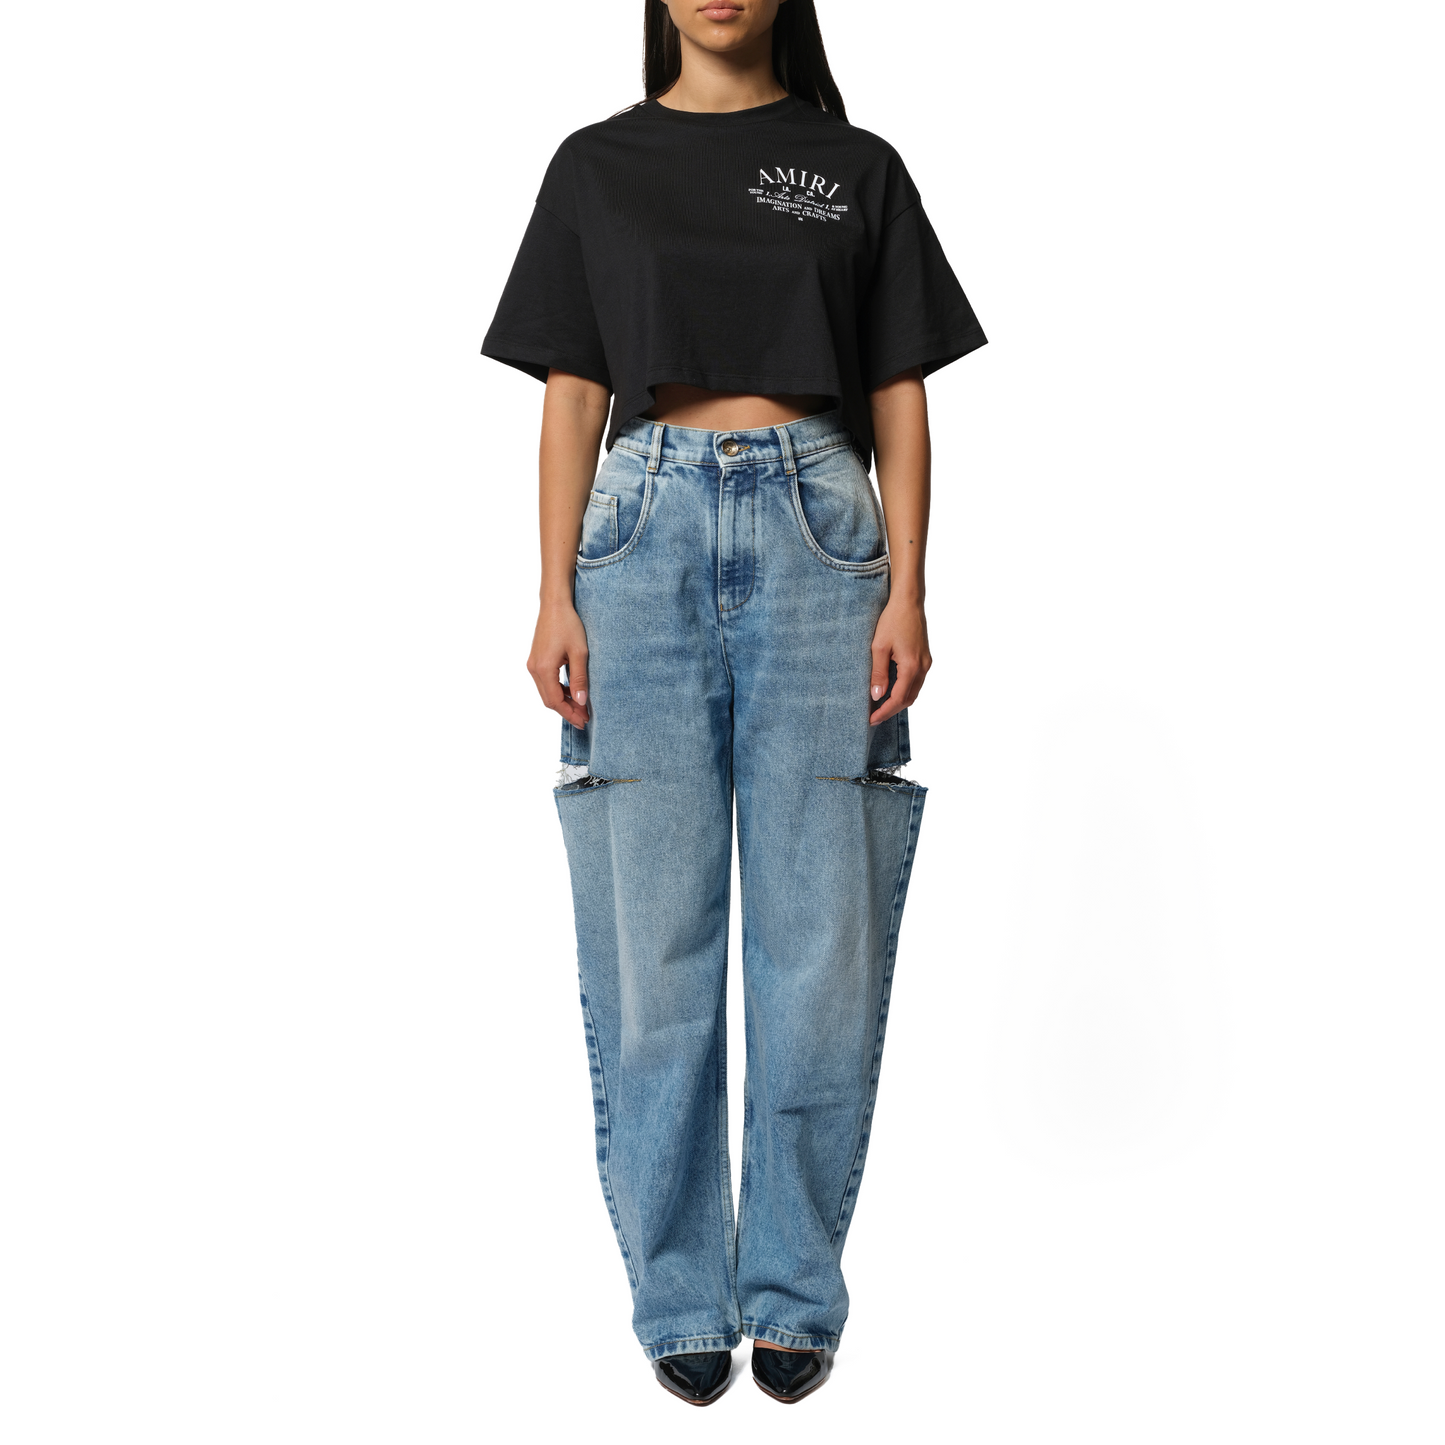 Arts District Cropped T-Shirt in Black